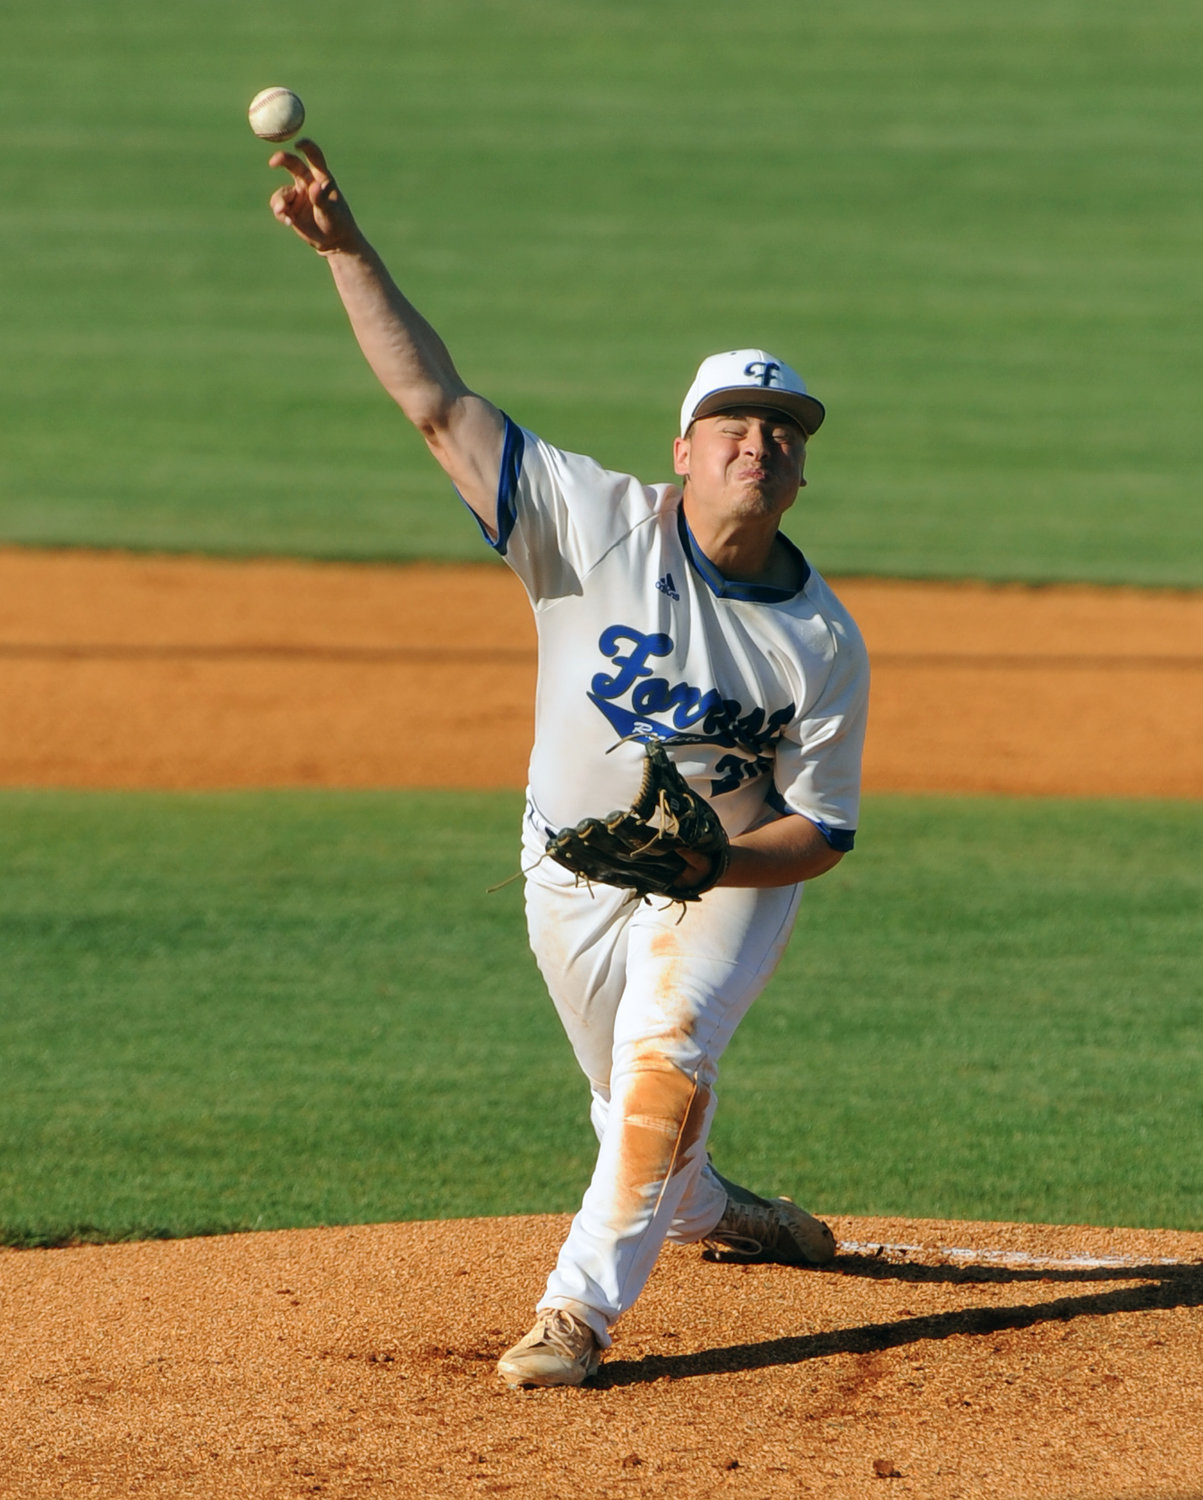 Riley Durbin has been the reliable starter on the mound for the Rockets this season.